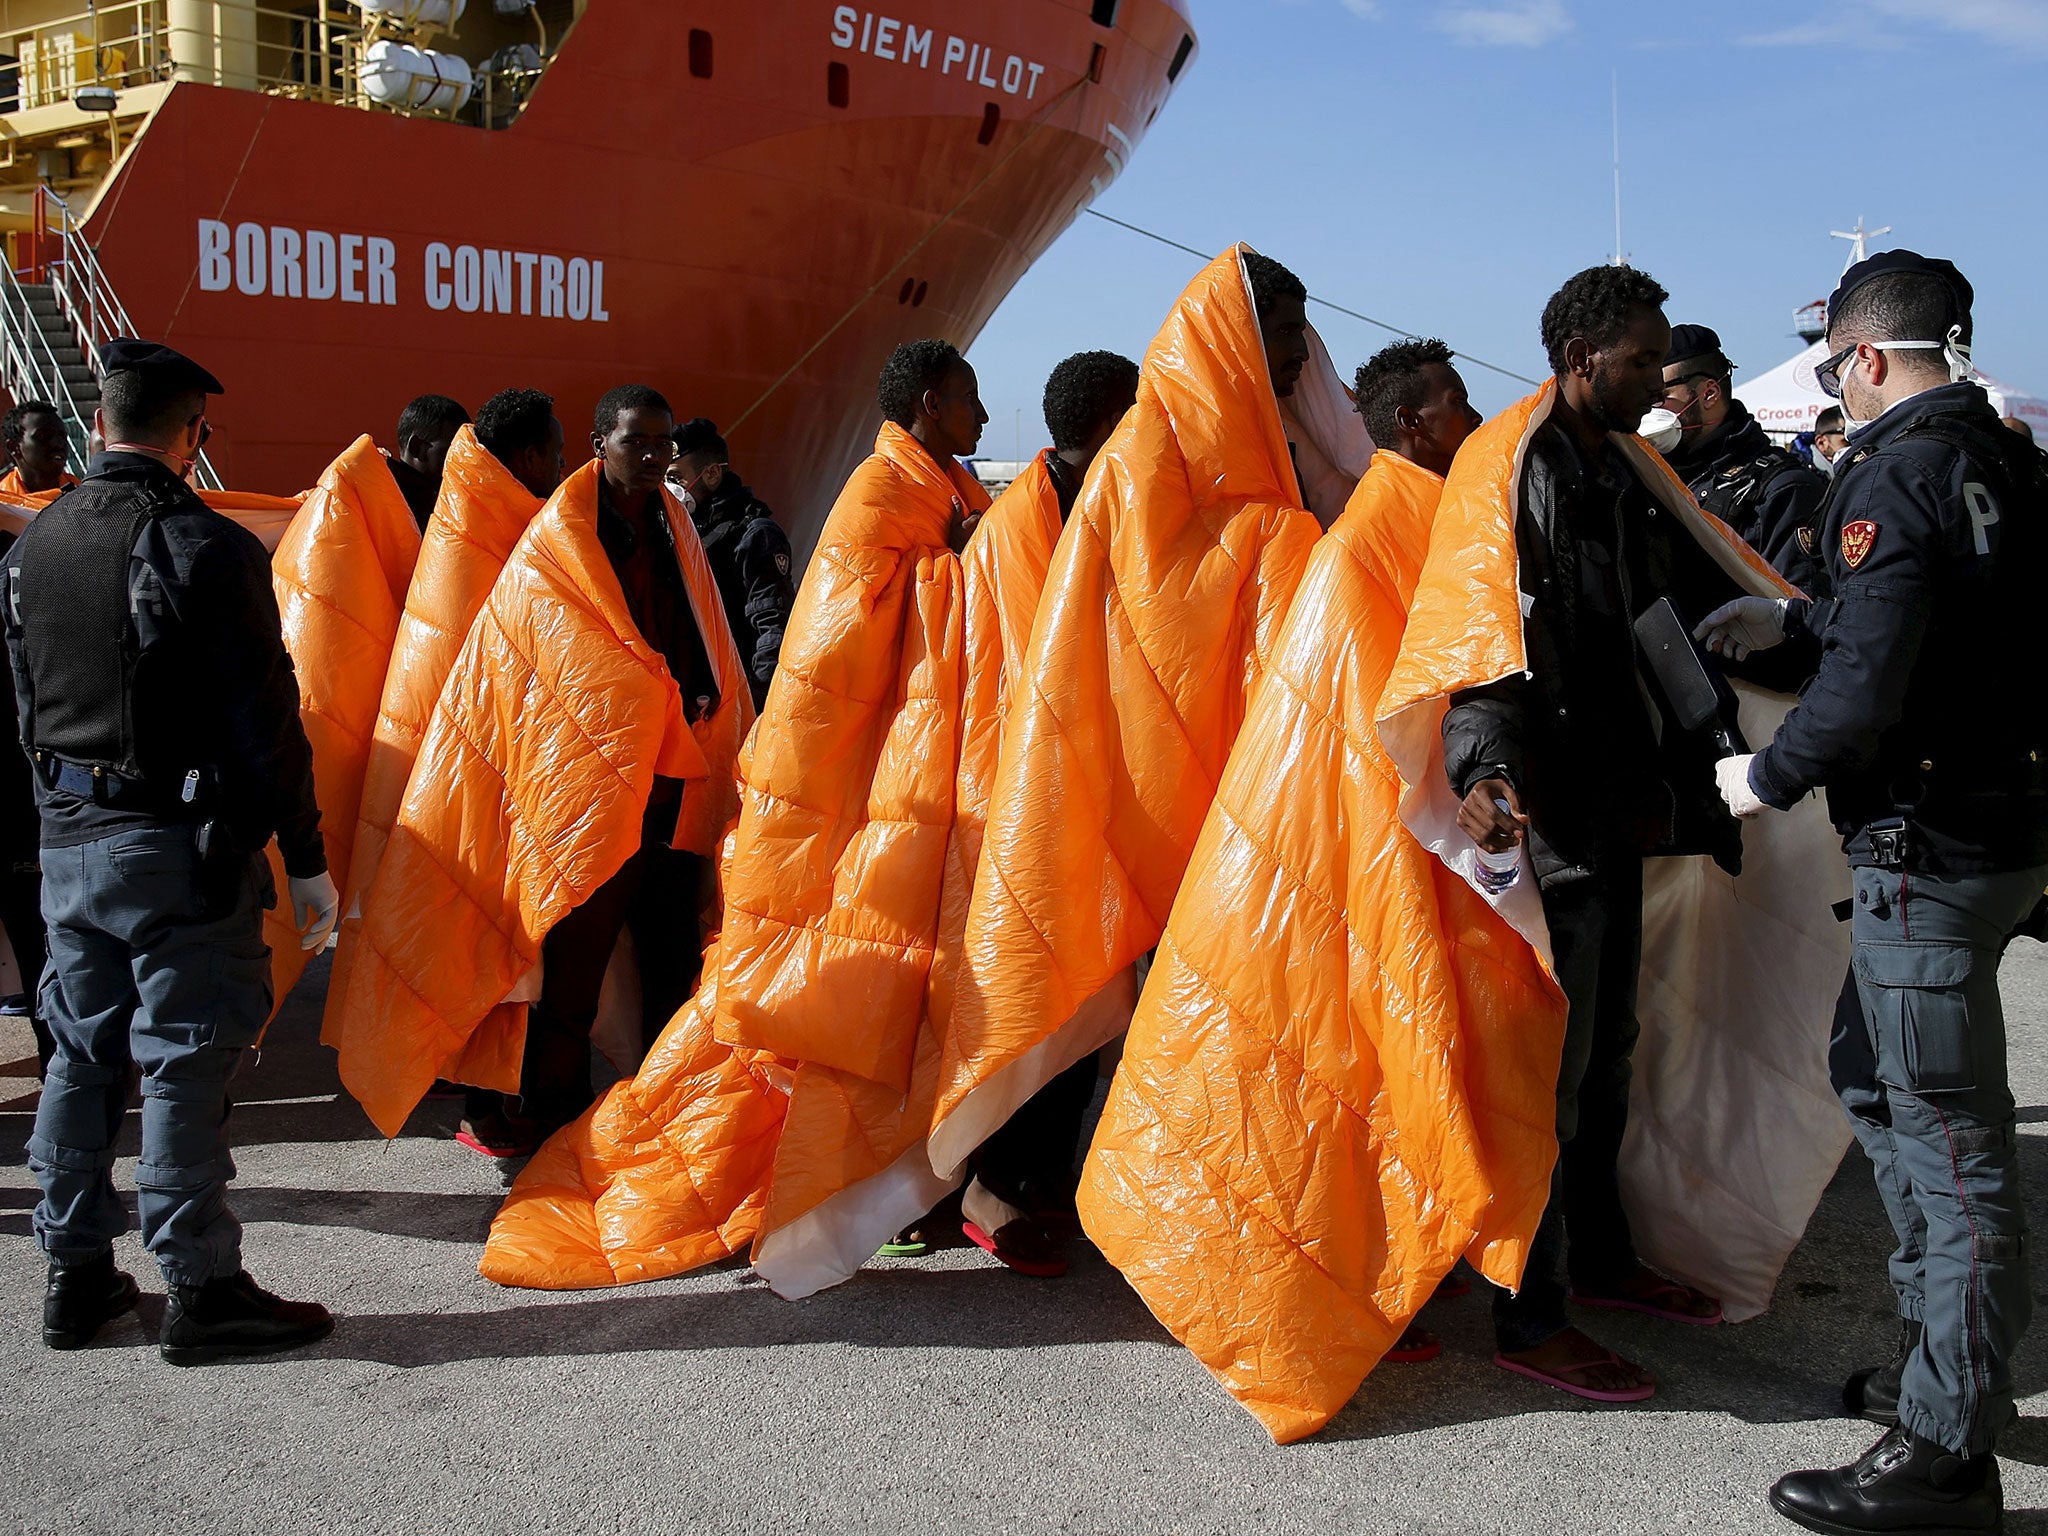 Migrants are inspected by policemen as they disembark from the Norwegian vessel Siem Pilot at Pozzallo's harbour, Italy, March 29, 2016.